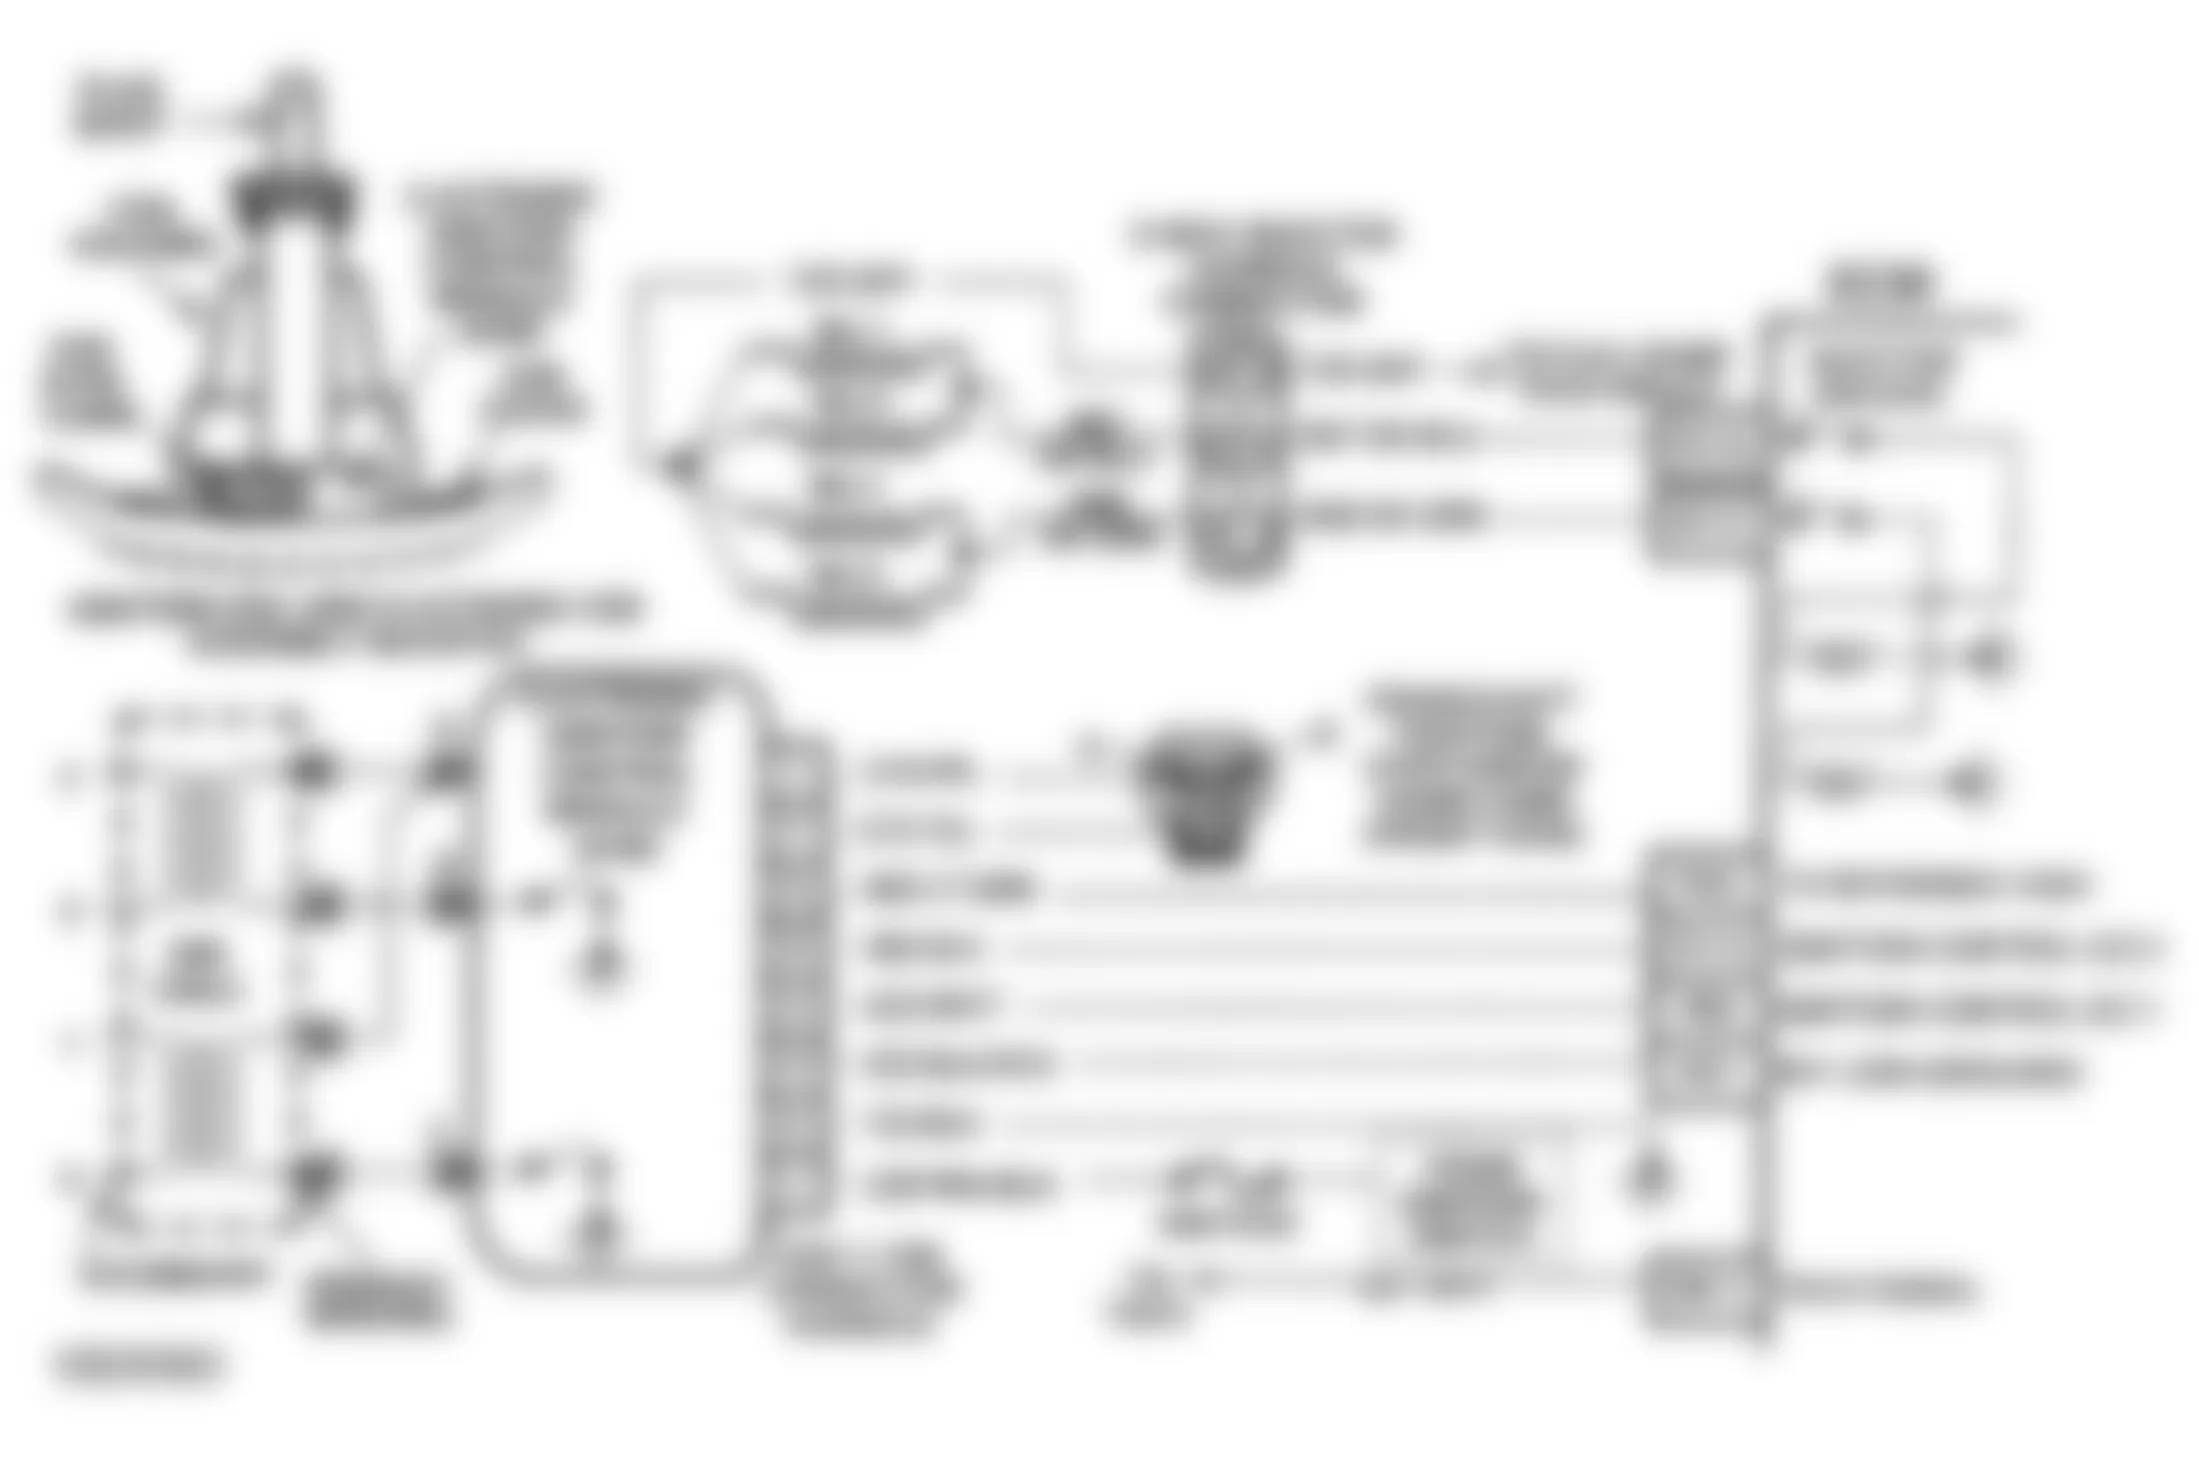 Buick Skylark Custom 1993 - Component Locations -  Code 16 Schematic (2.3L N Body) Missing 2X Reference Circuit